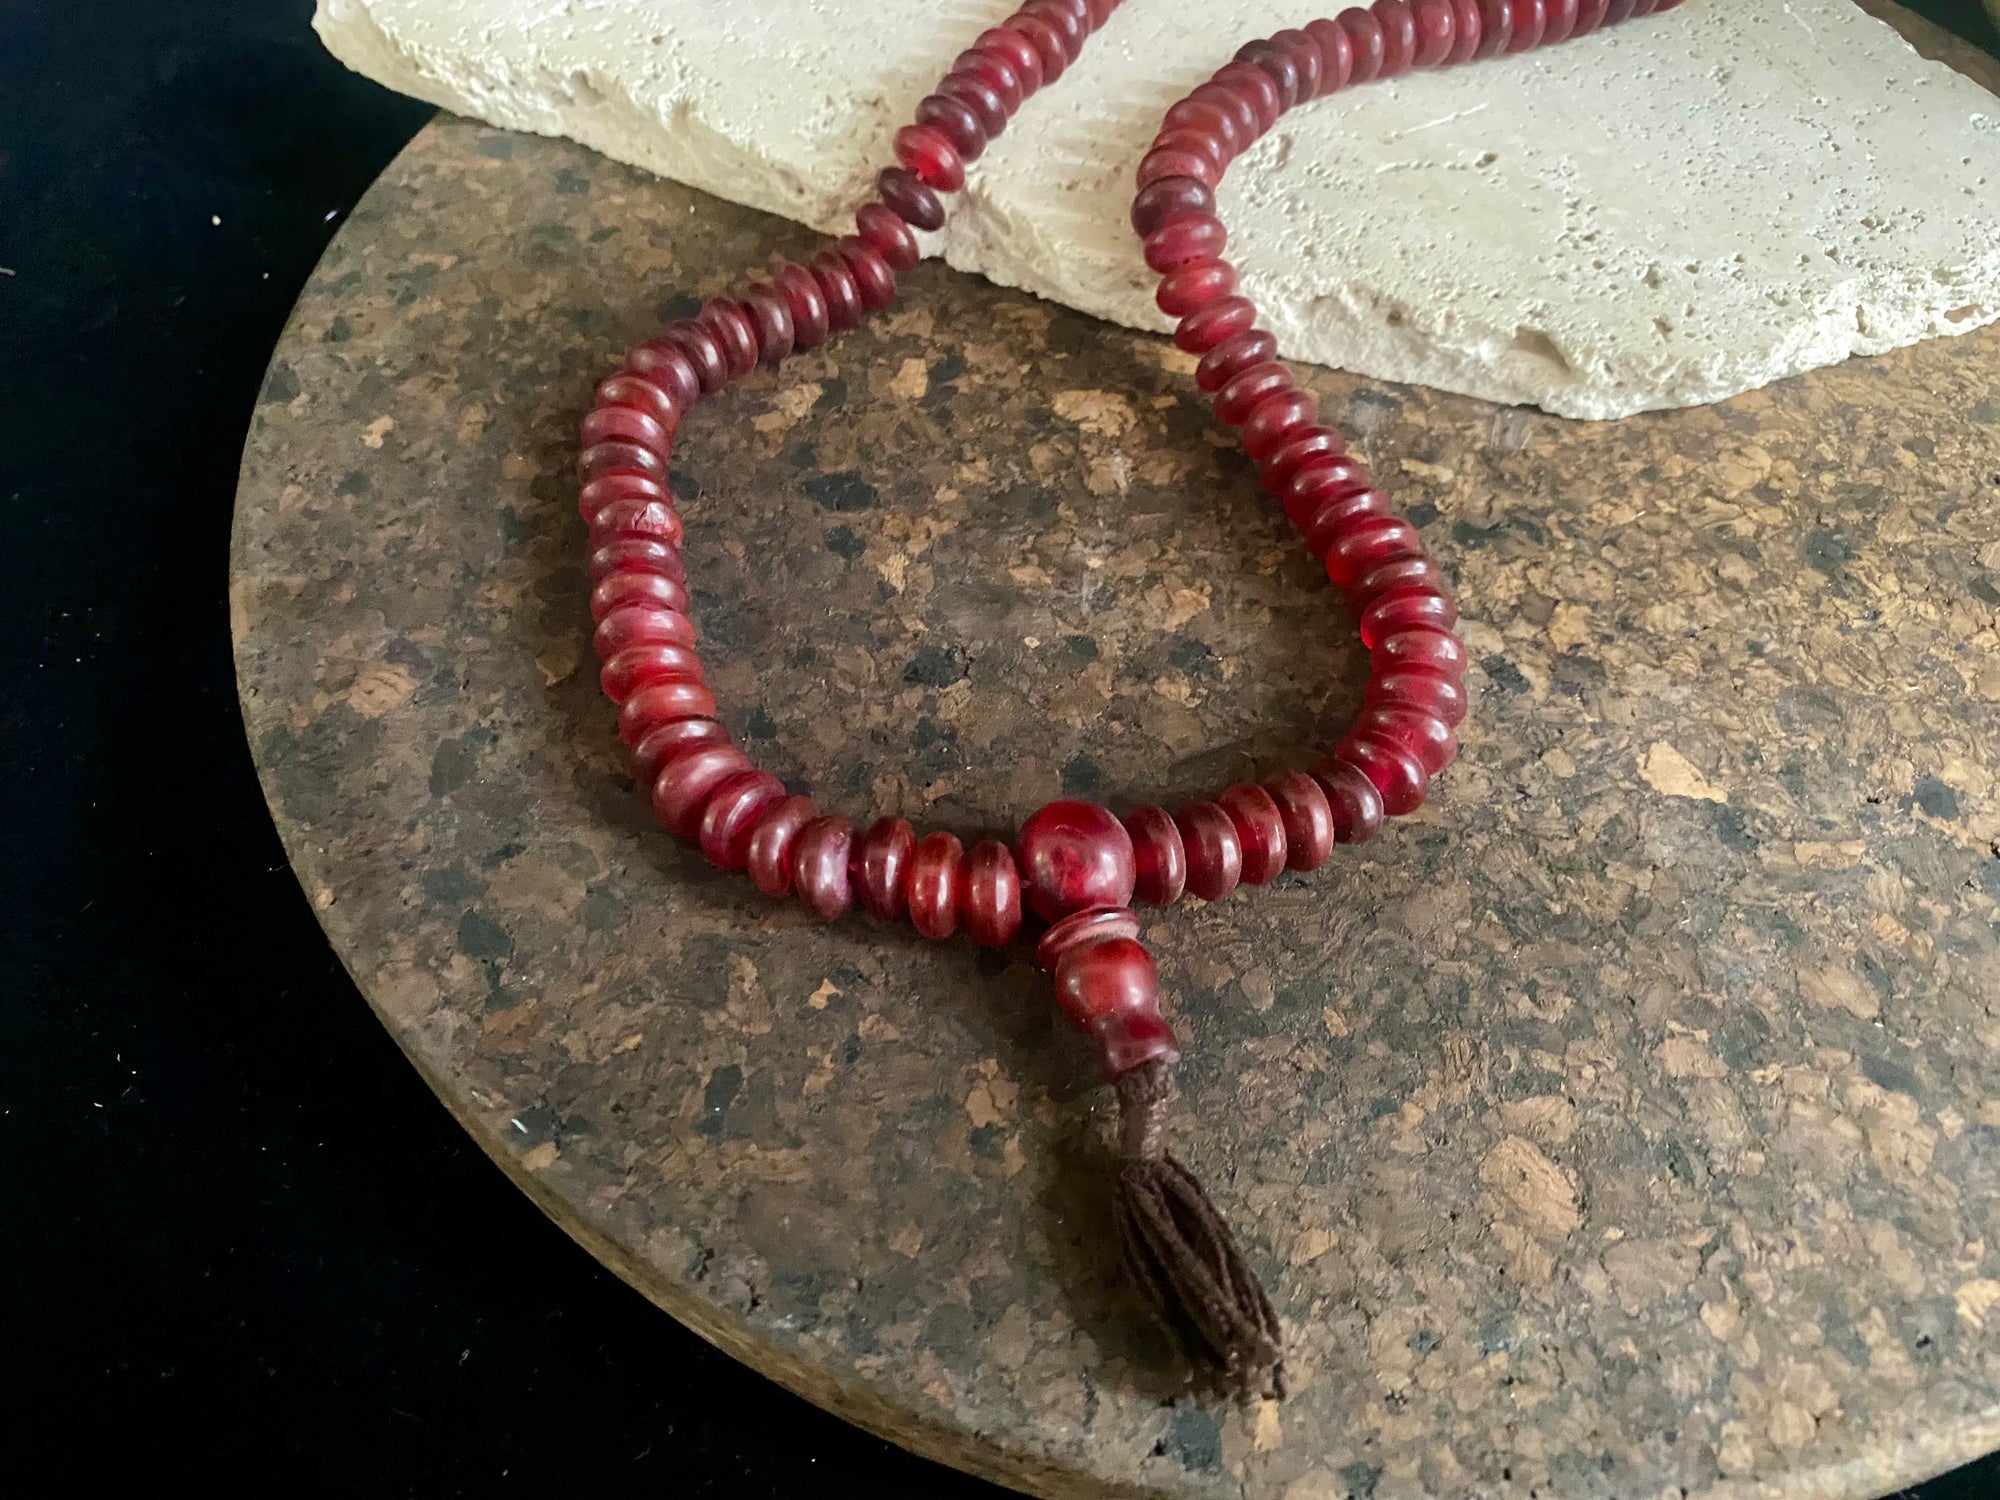 Women or men’s buffalo horn Buddhist mala. As per a standard Buddhist mala it contains 108 beads and has a central stupa bead. From Nepal. About 35 cm length including tassle. Fits easily over the head. Bone beads are approximately 1 cm x 3 mm